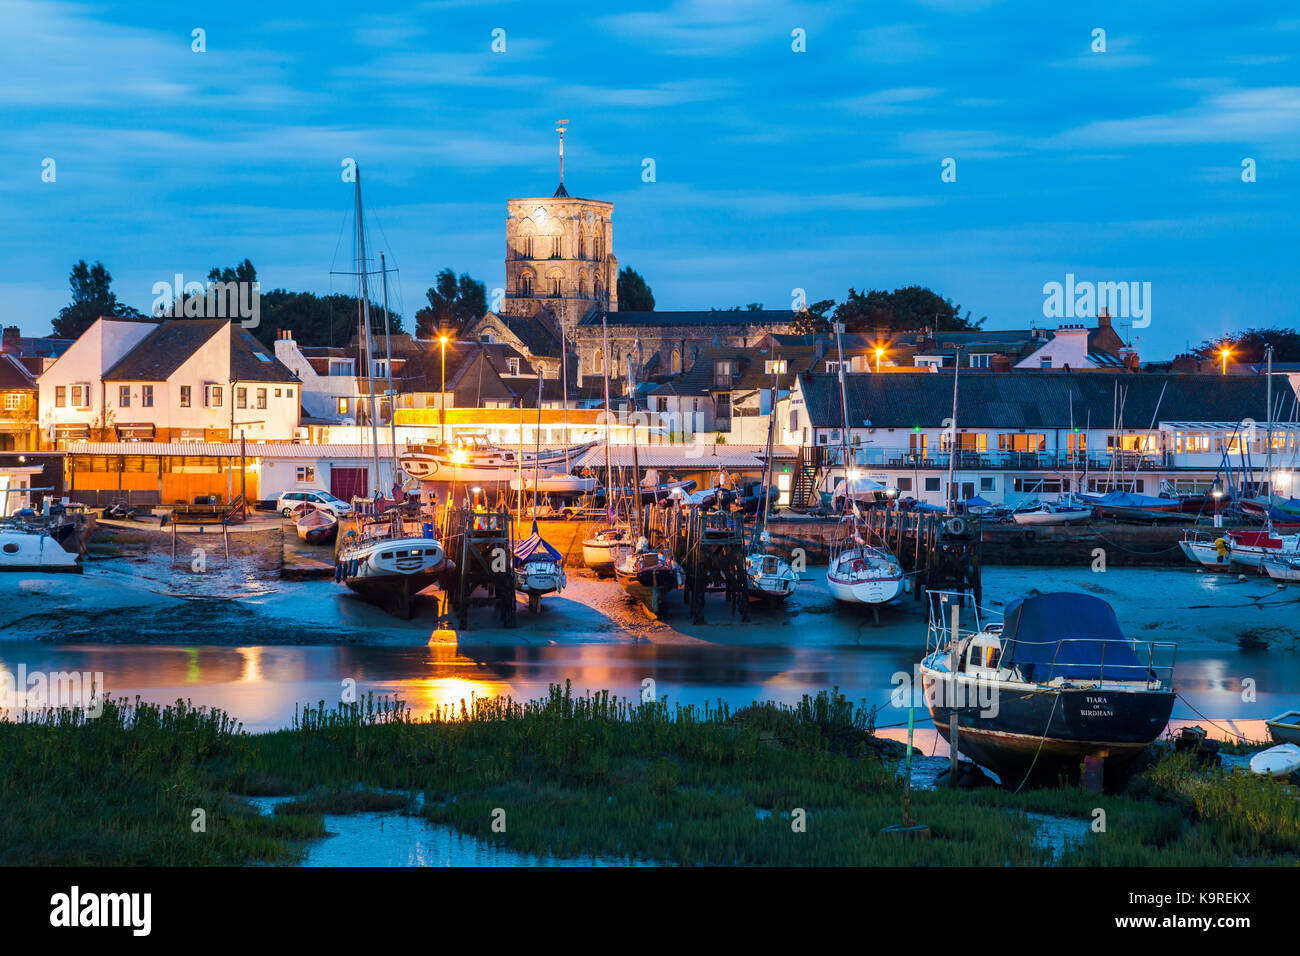 Abend in Shoreham-by-Sea, West Sussex. Stockfoto